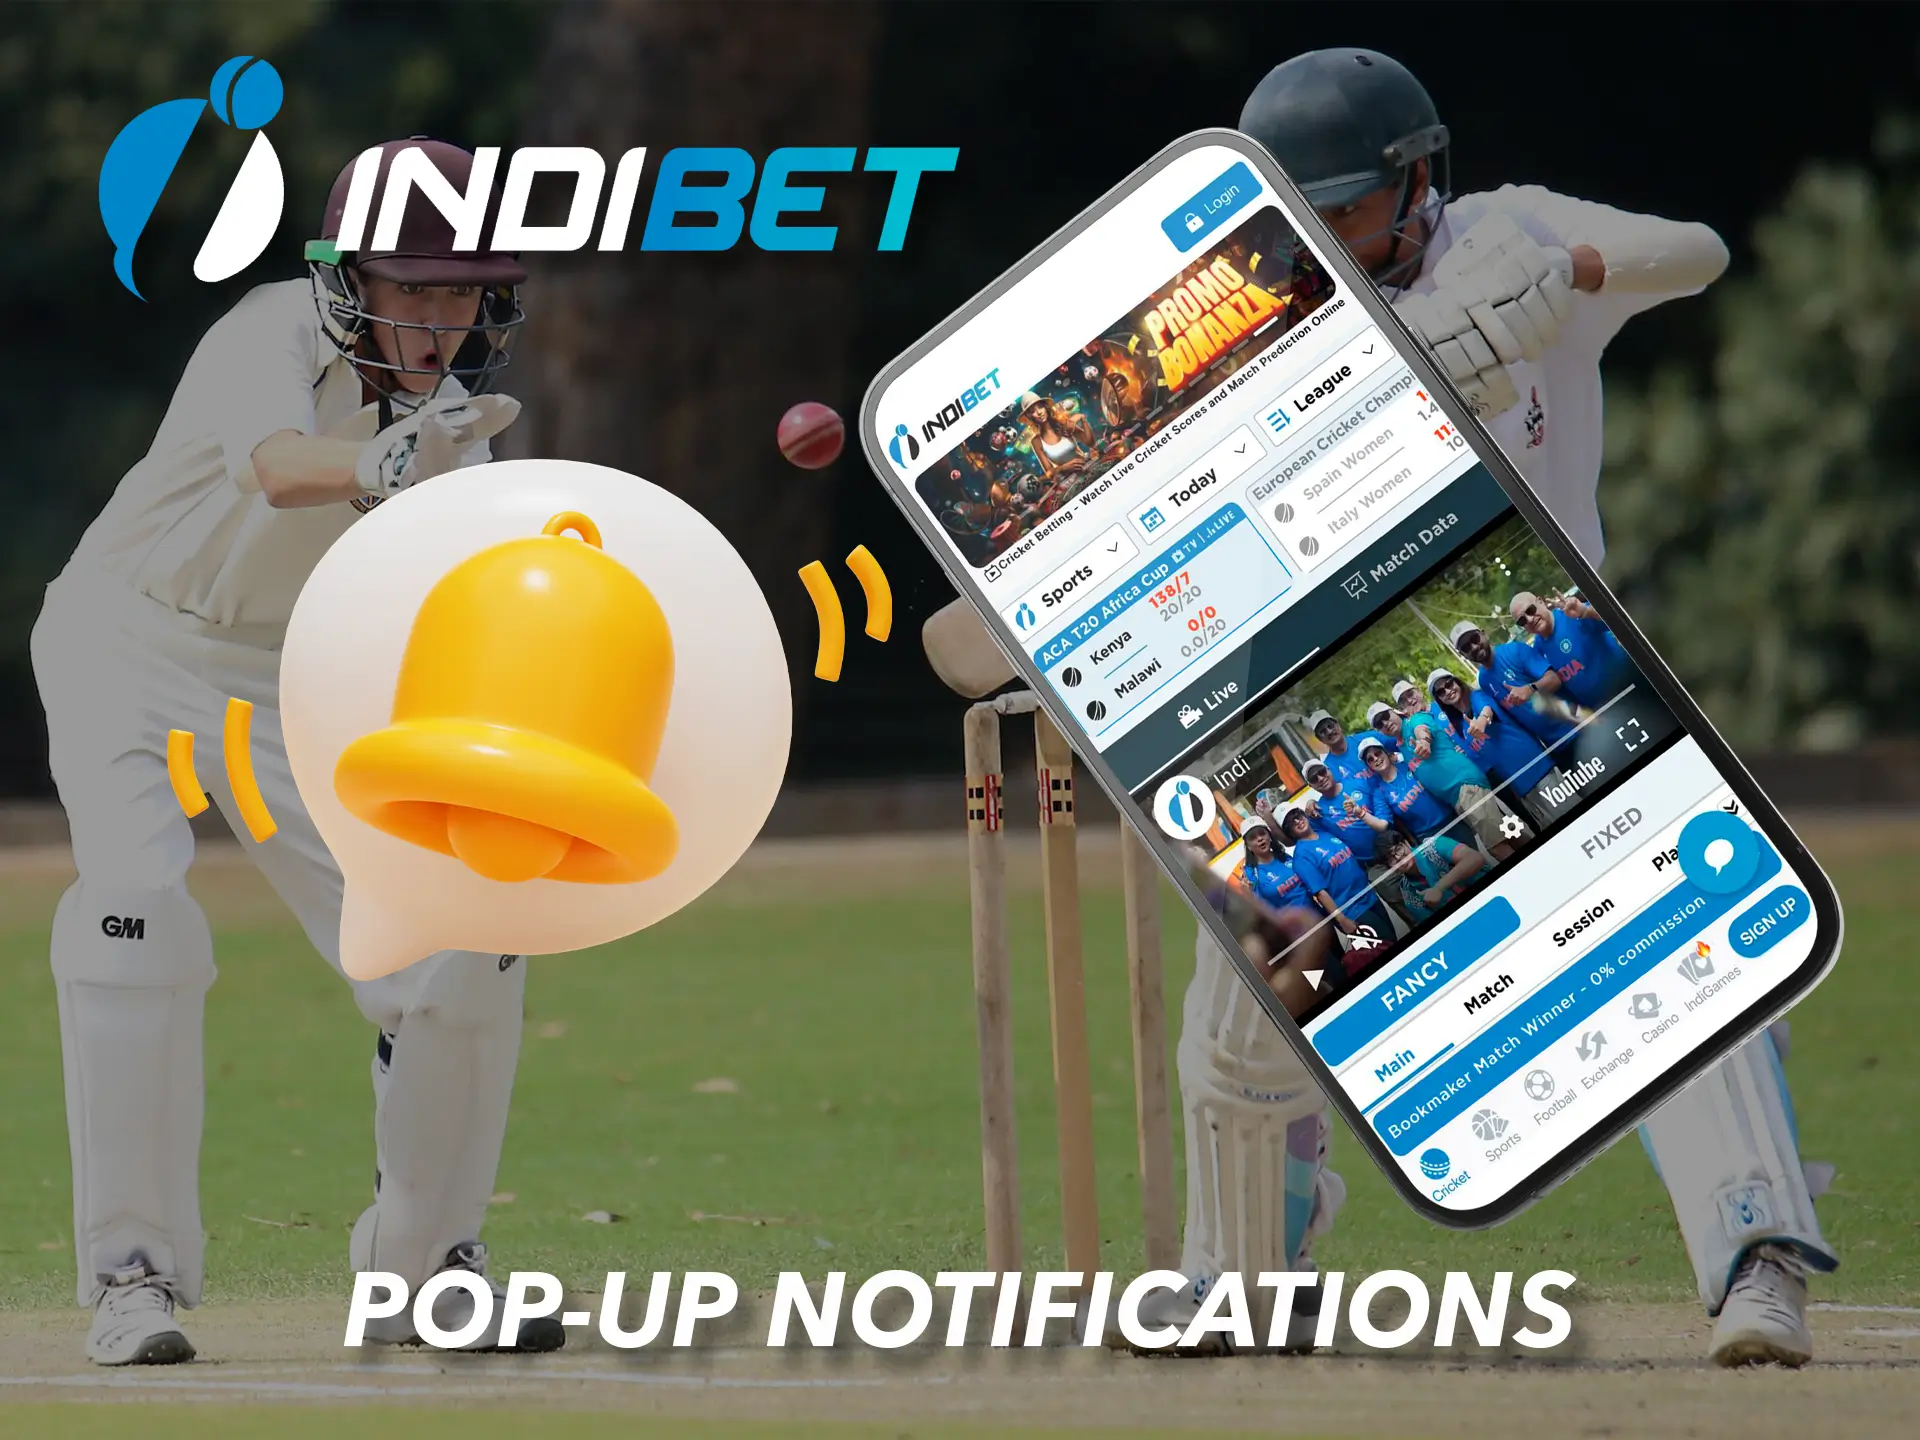 You will always receive a direct notification from Indibet when your team makes an effective attack.